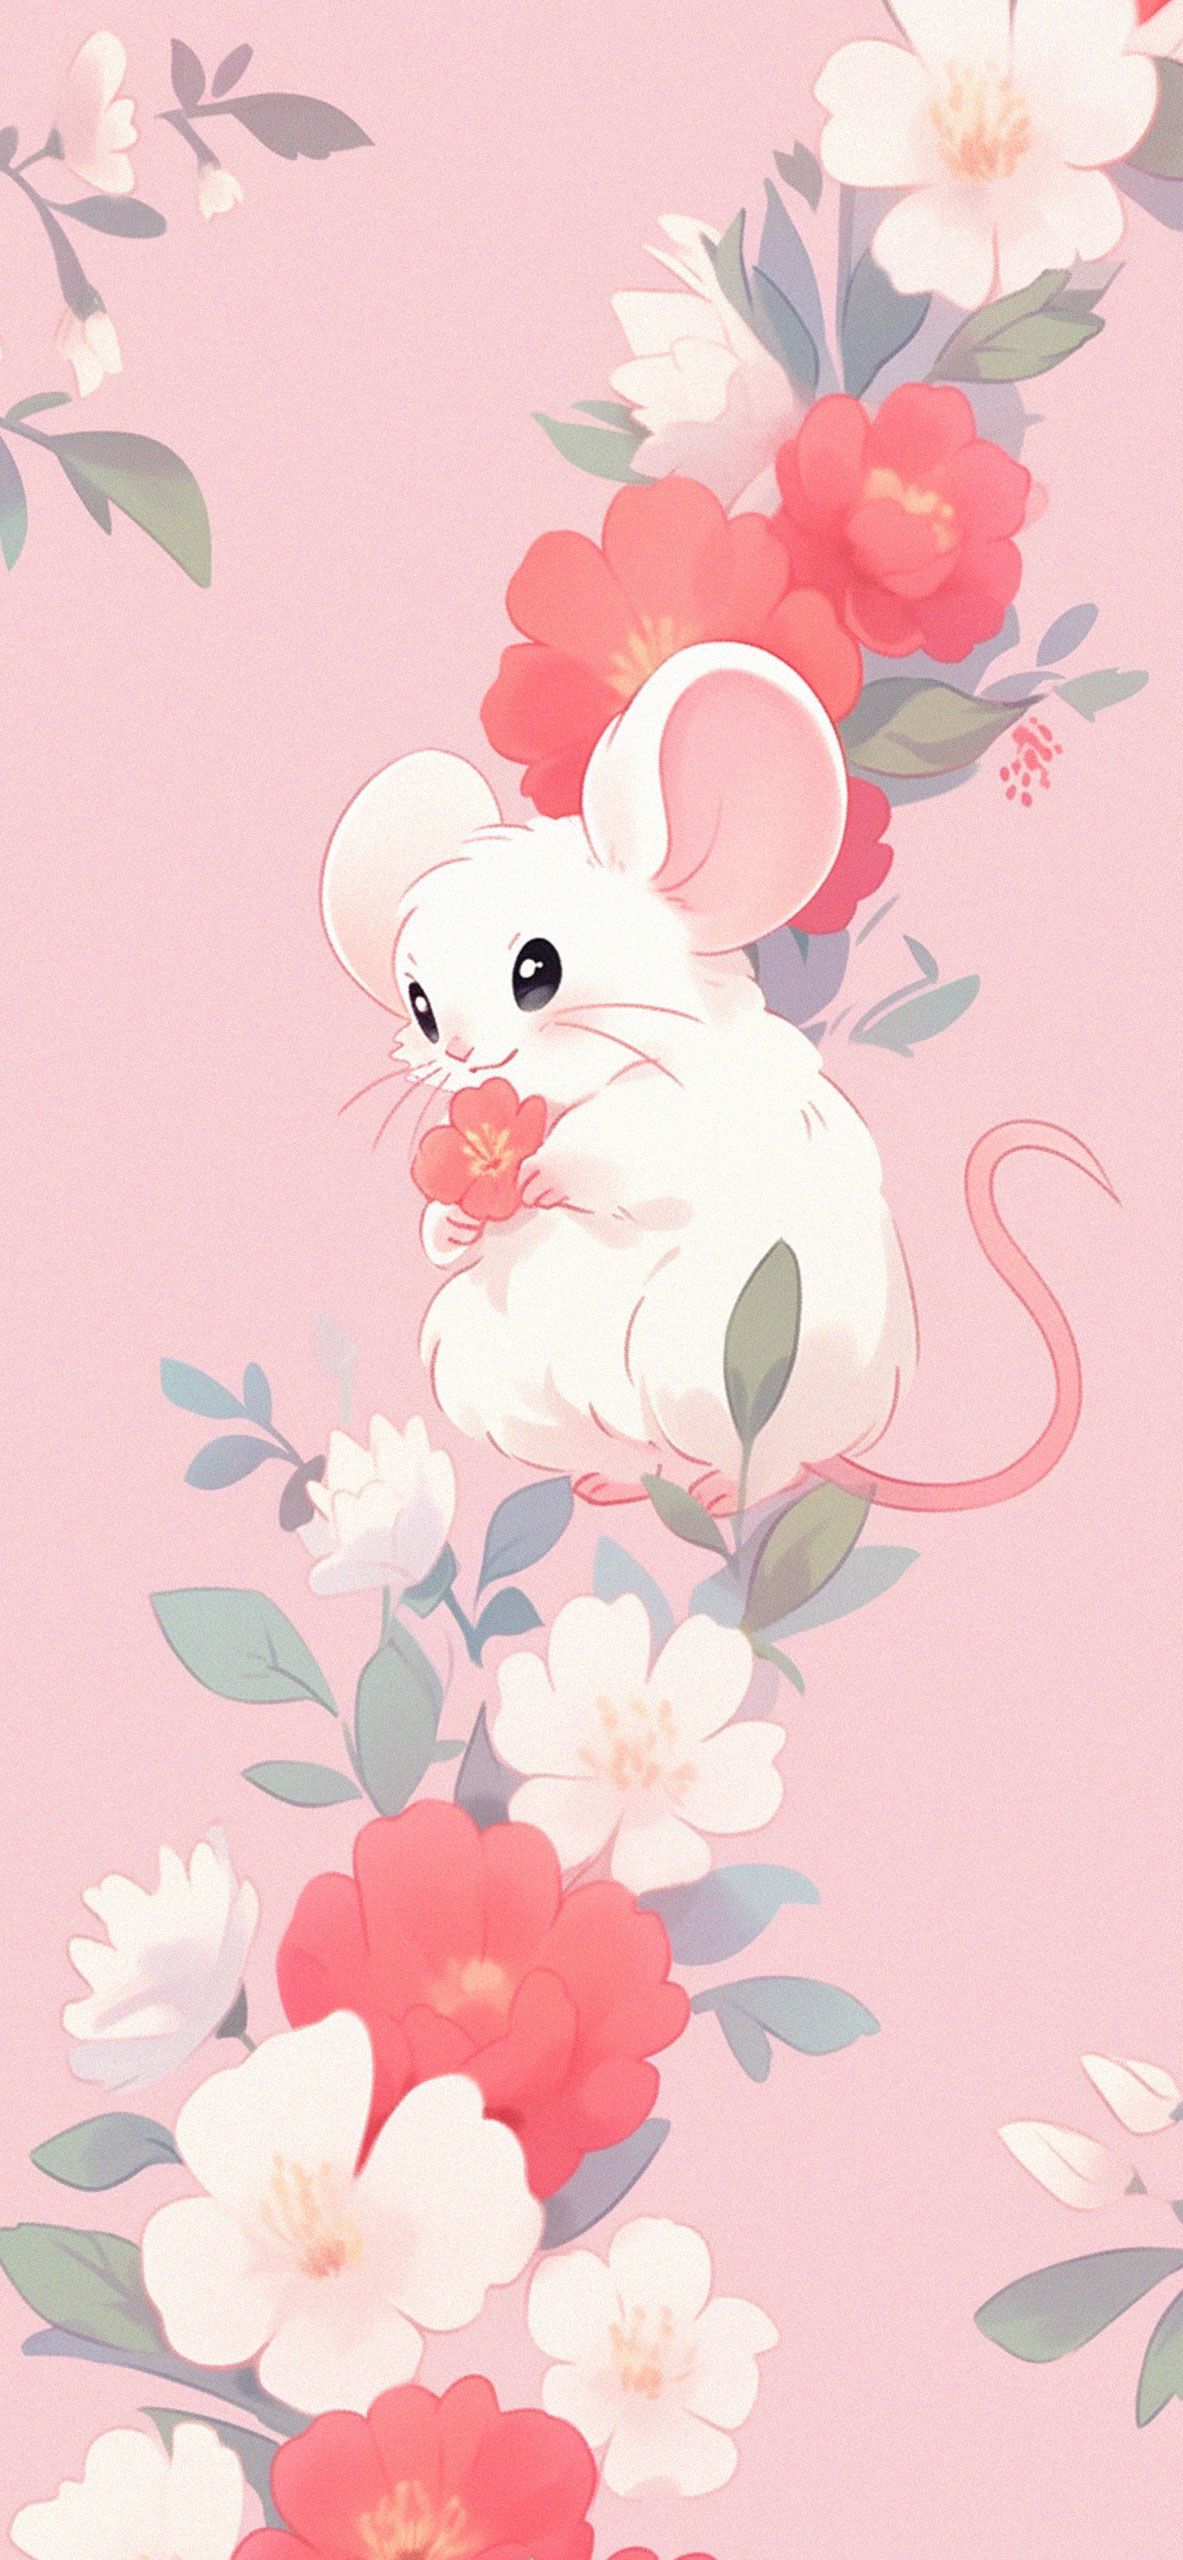 A white mouse holding a red flower on a pink background - Cute pink